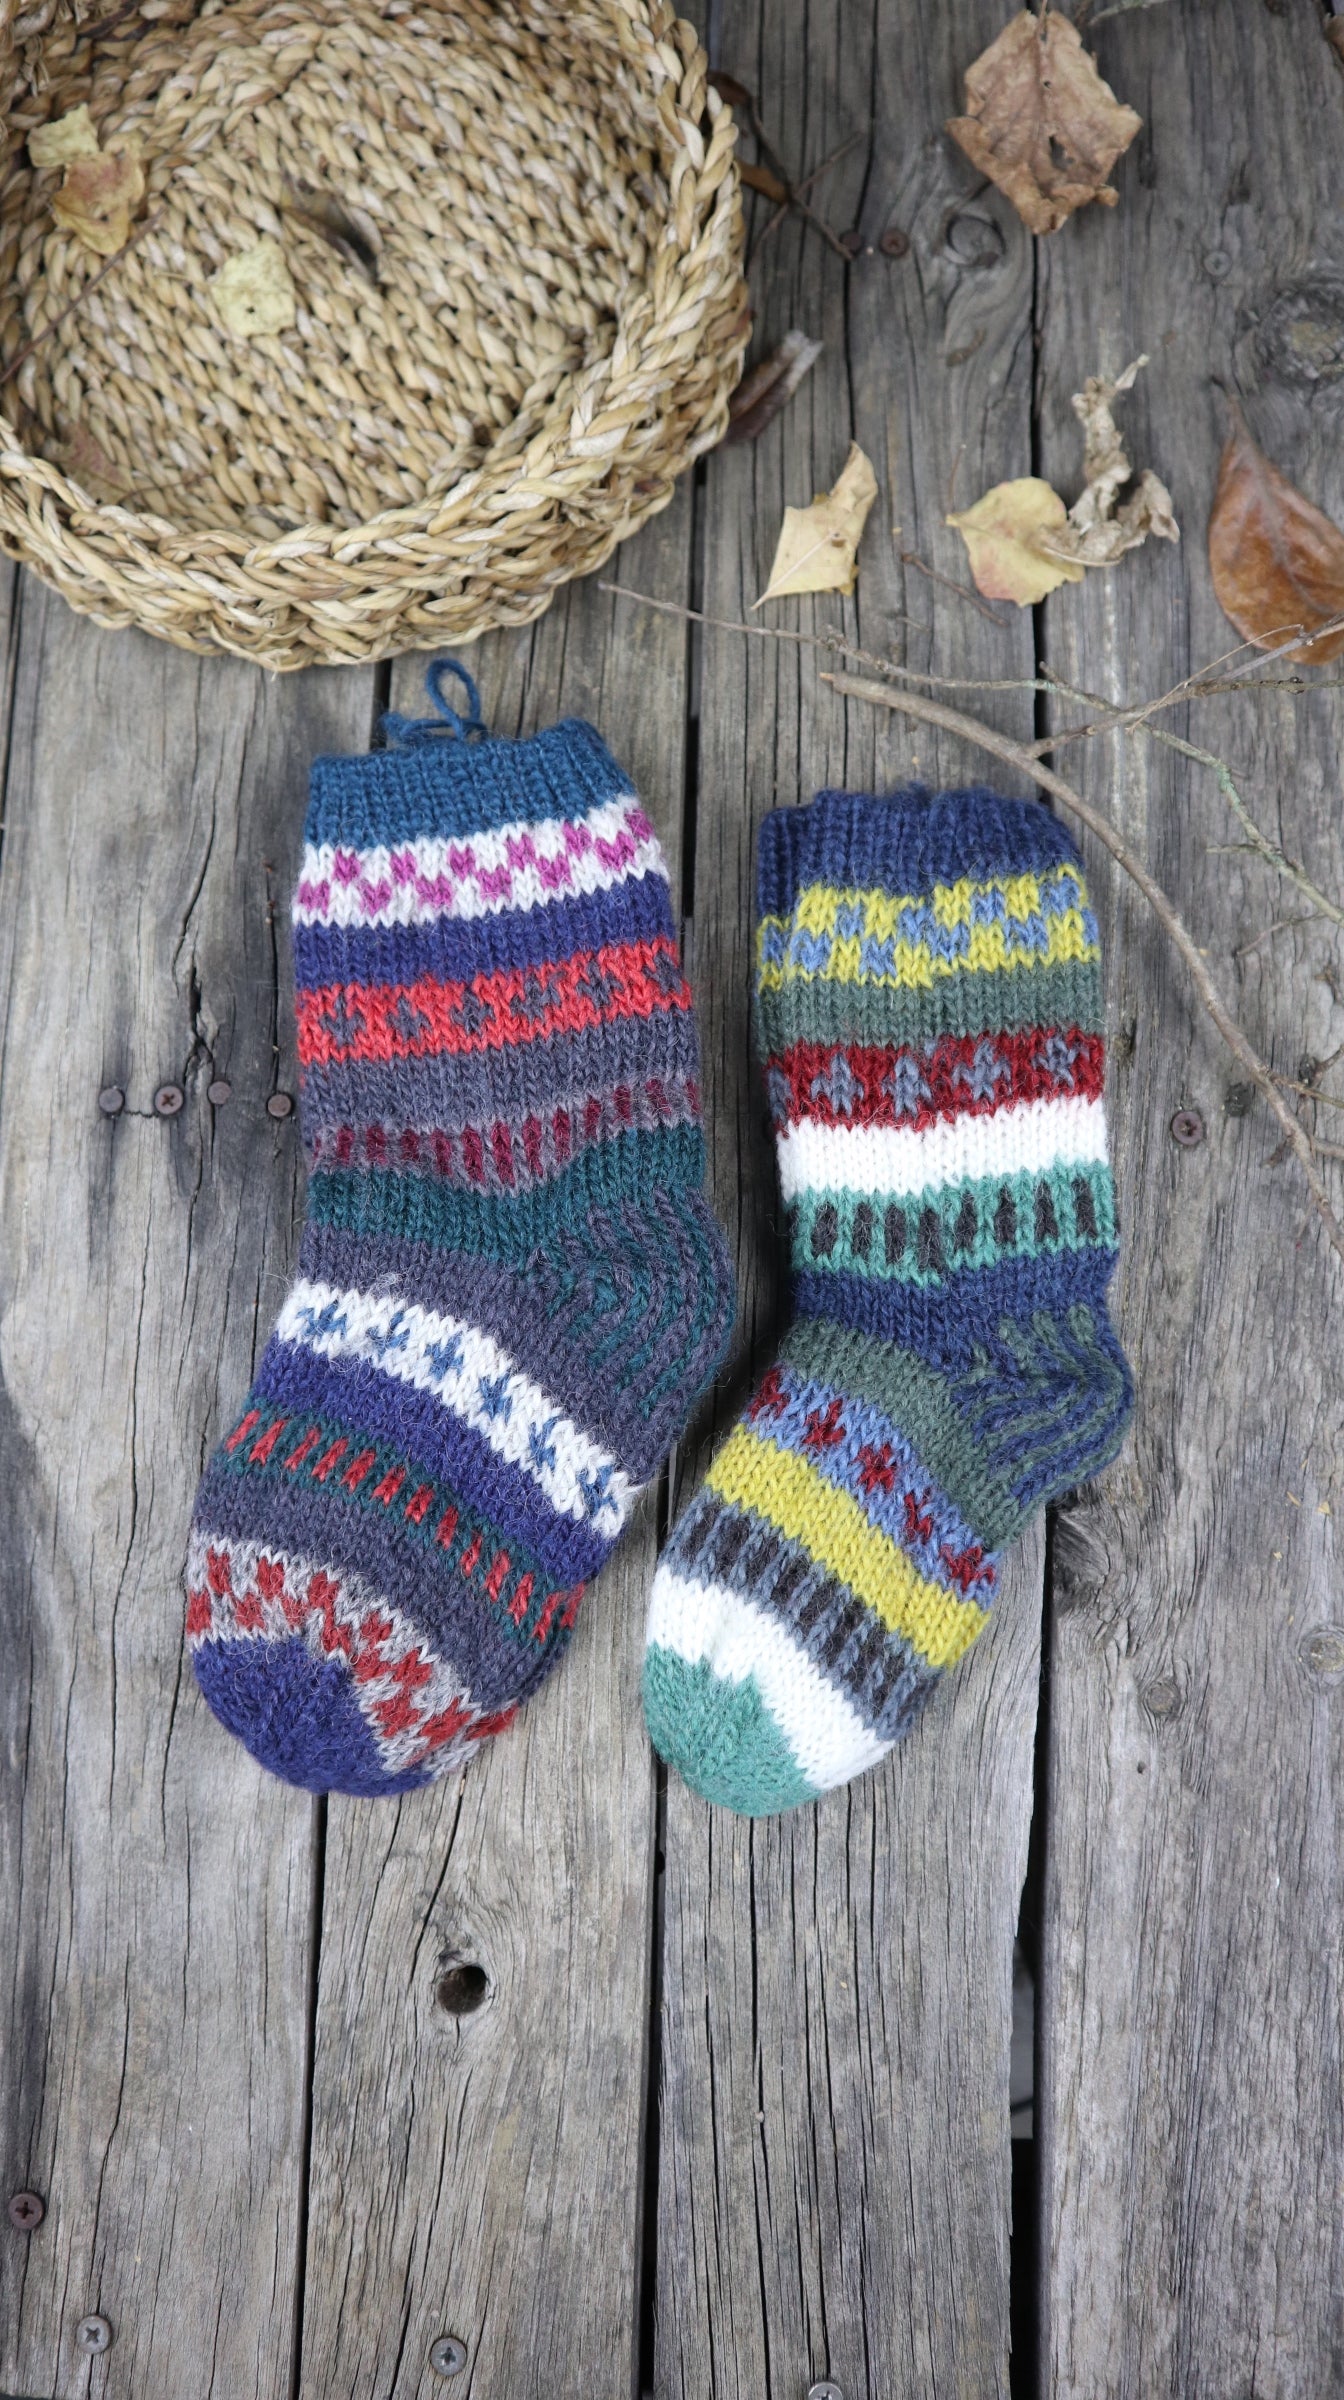 Fair Trade Ethical Children's Patterned Woollen Socks in Green, Brown and Red